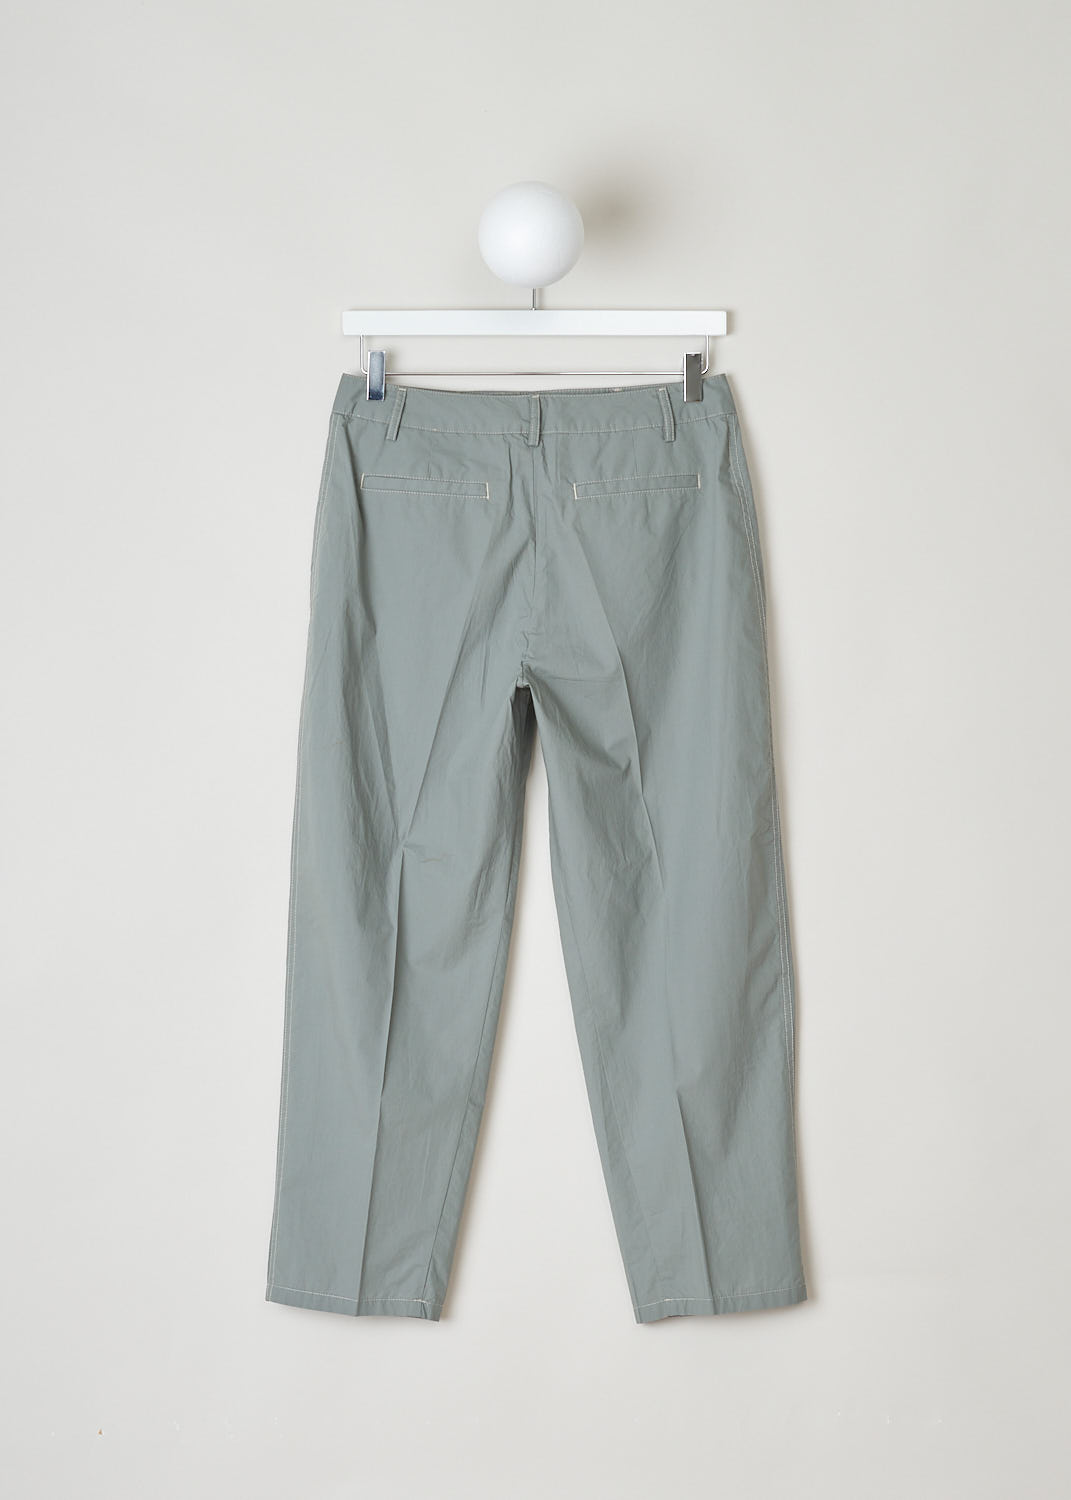 CLOSED, LIGHTWEIGHT GREY TROUSERS, LUDWIG_C91045_53A_22_691, Grey, Back, These comfortable grey trousers feature a regular length, two forward slanted pockets on the front and two welt pockets on the back.